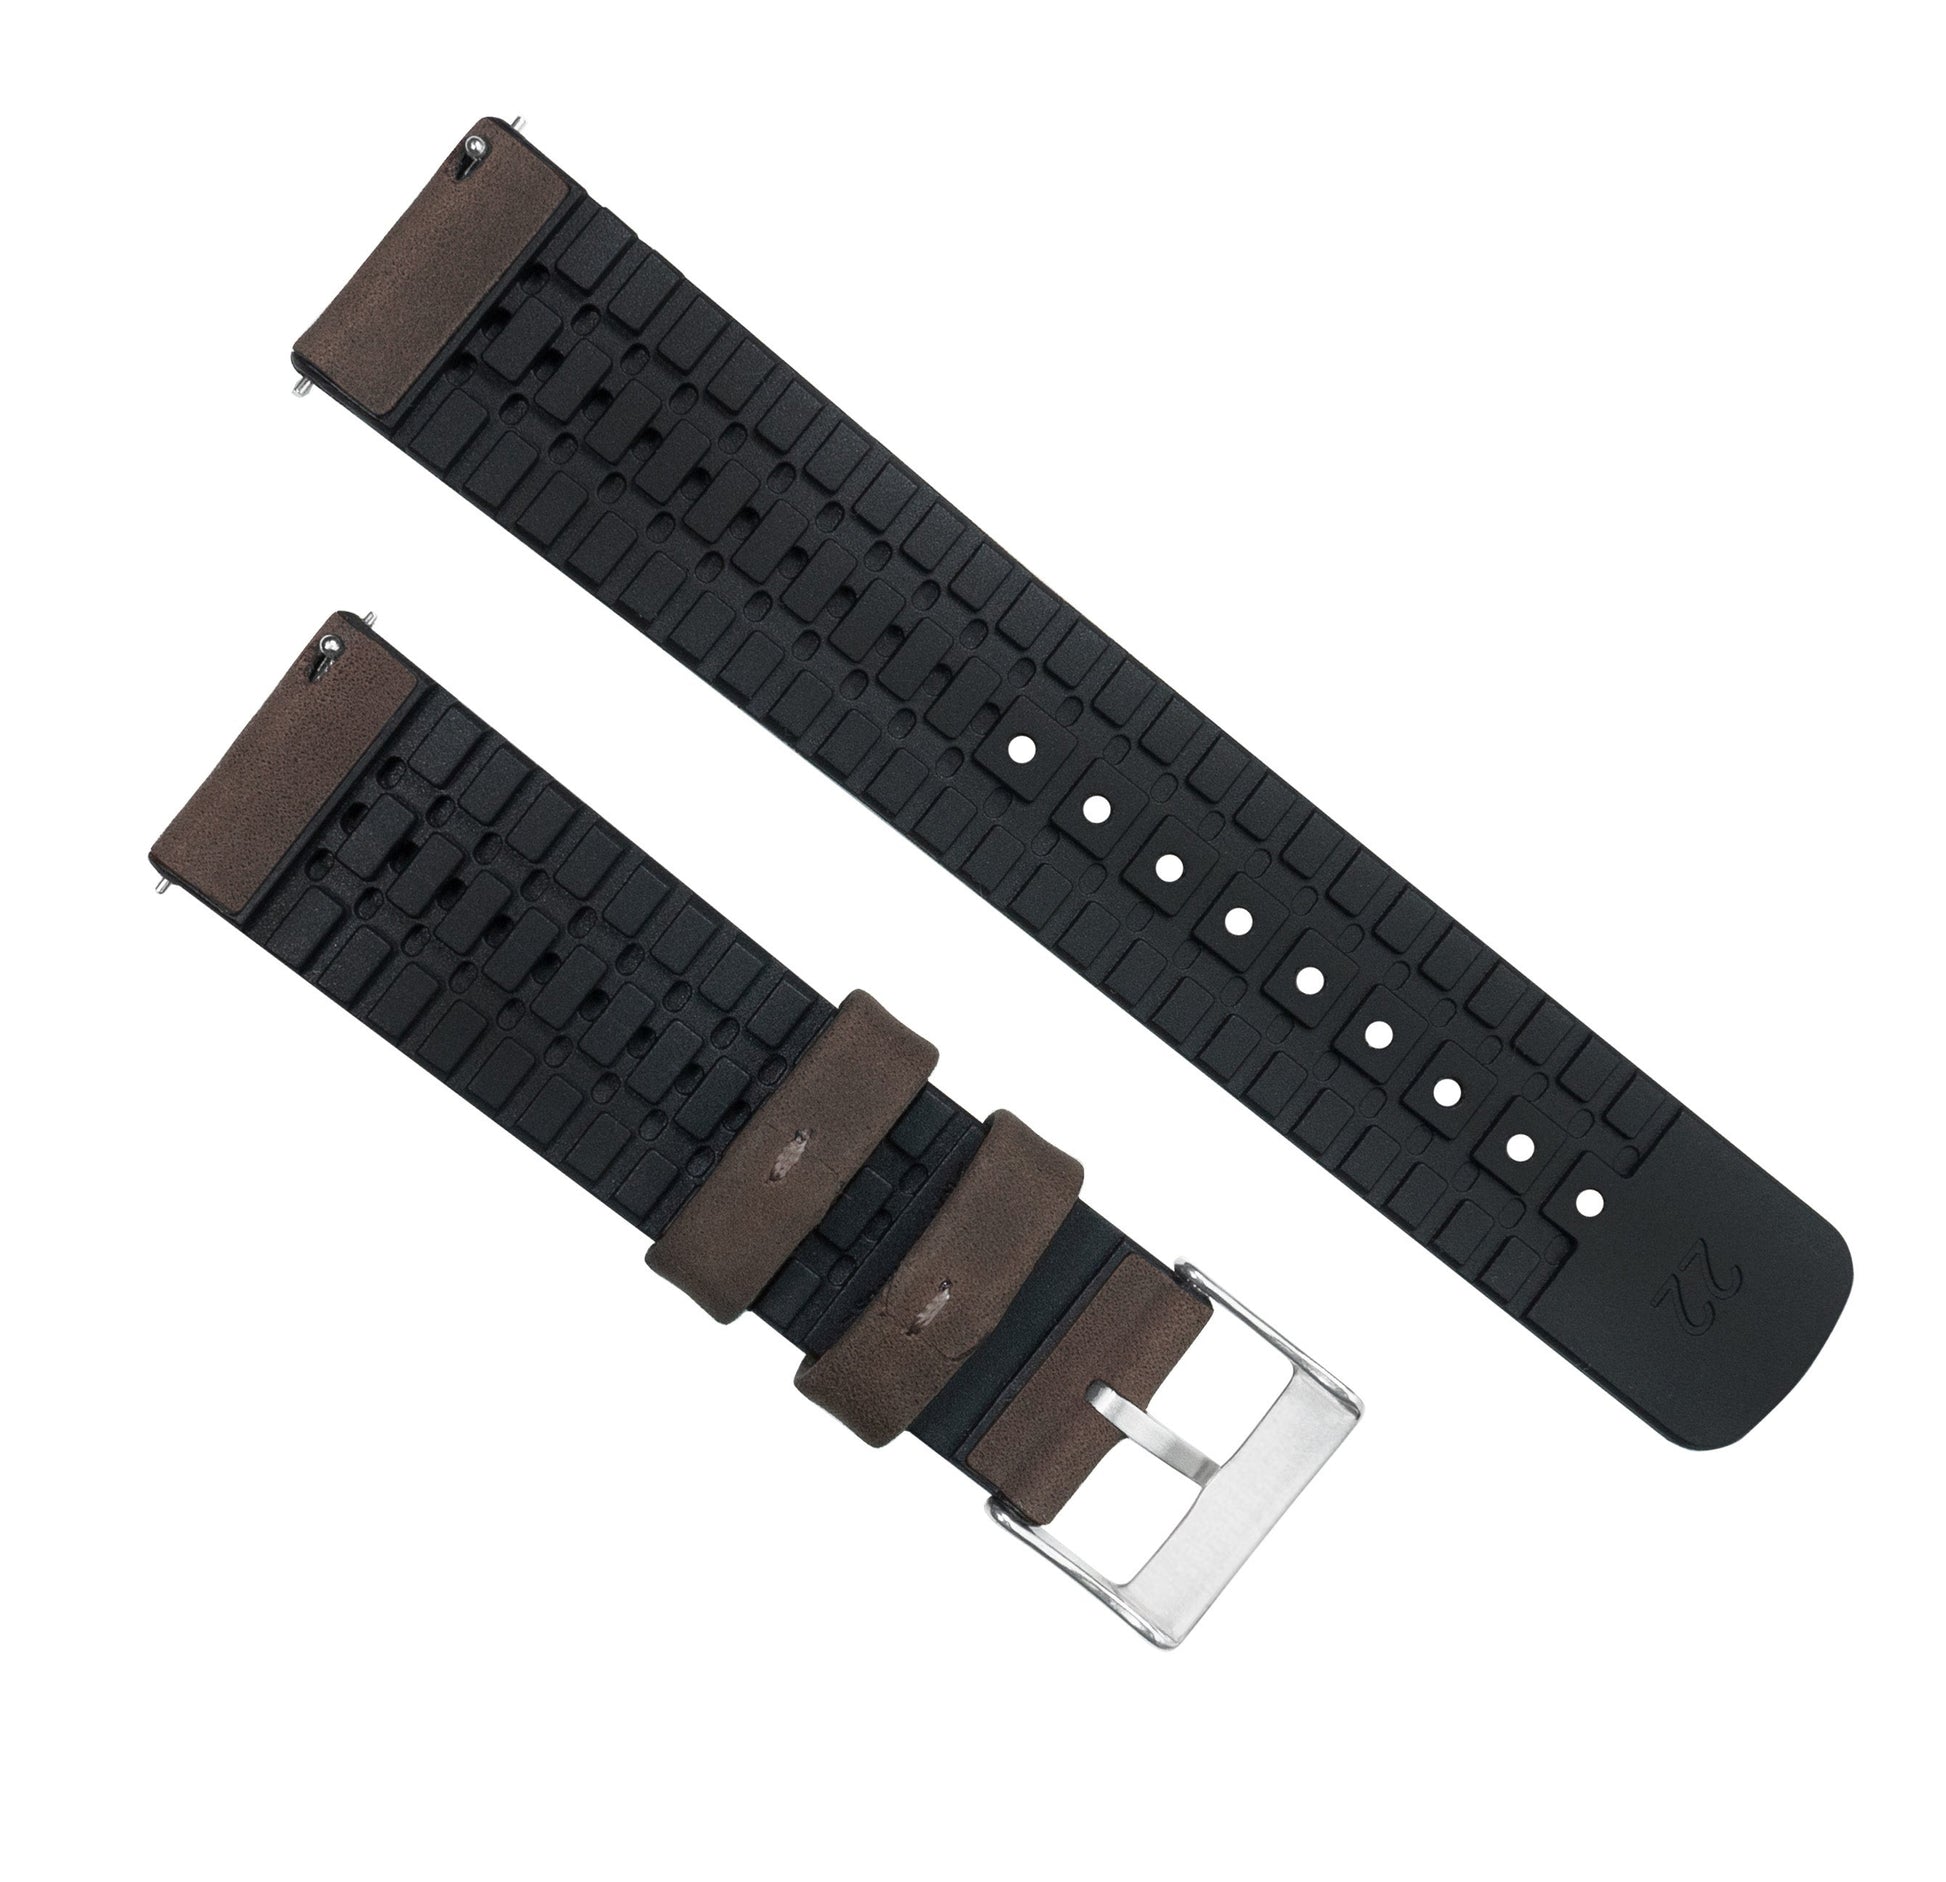 Samsung Galaxy Watch5 | Leather and Rubber Hybrid | Smoke Brown - Barton Watch Bands